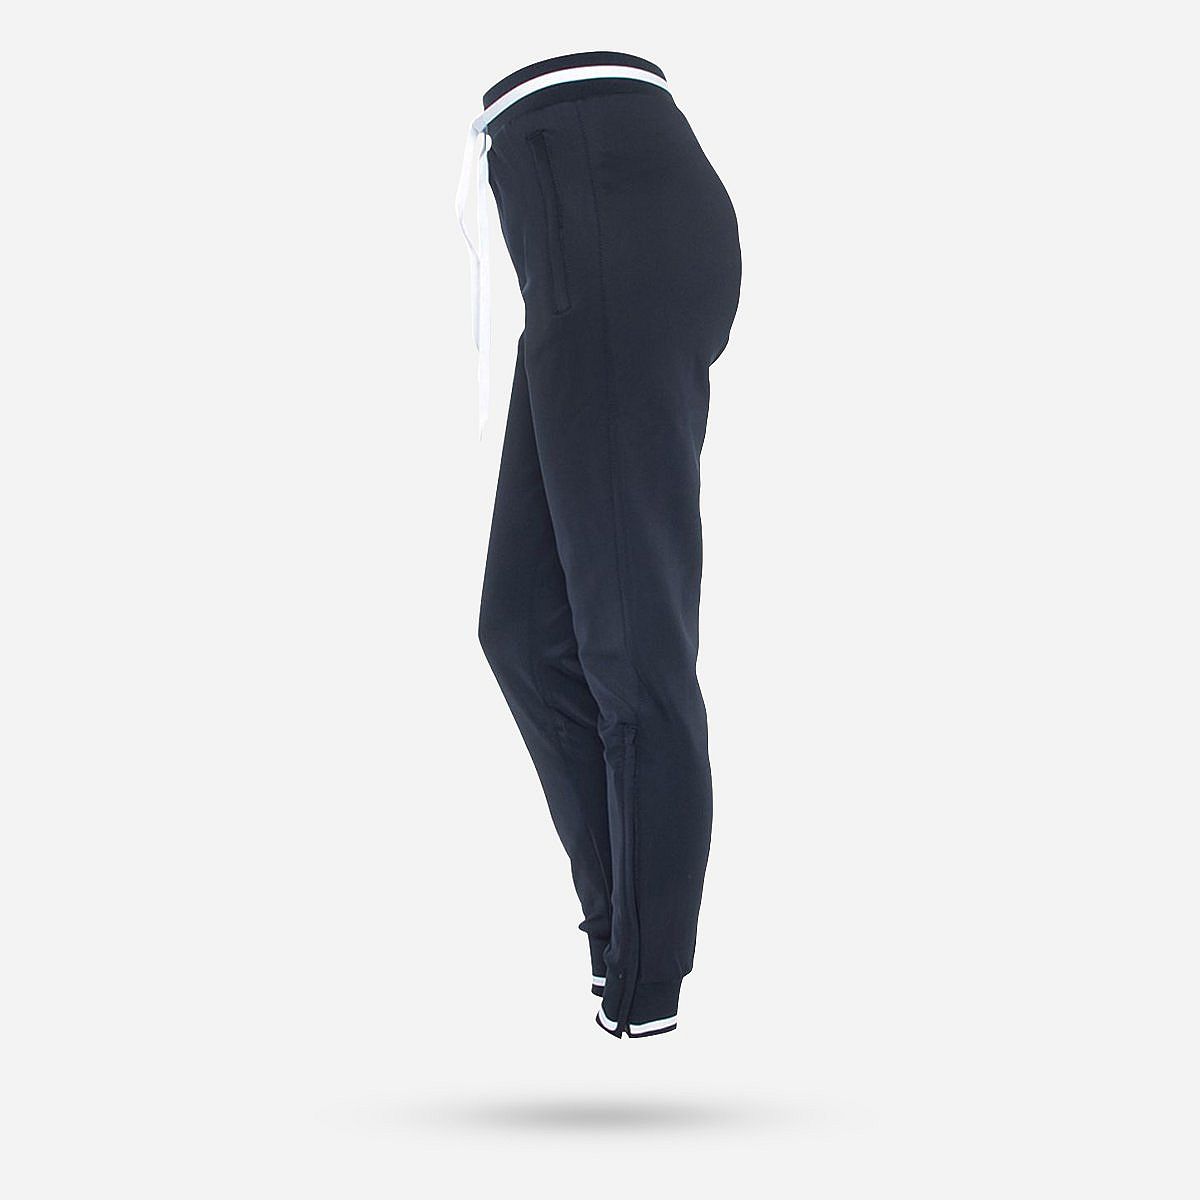 AN208921 Women's Knitted Pant IM